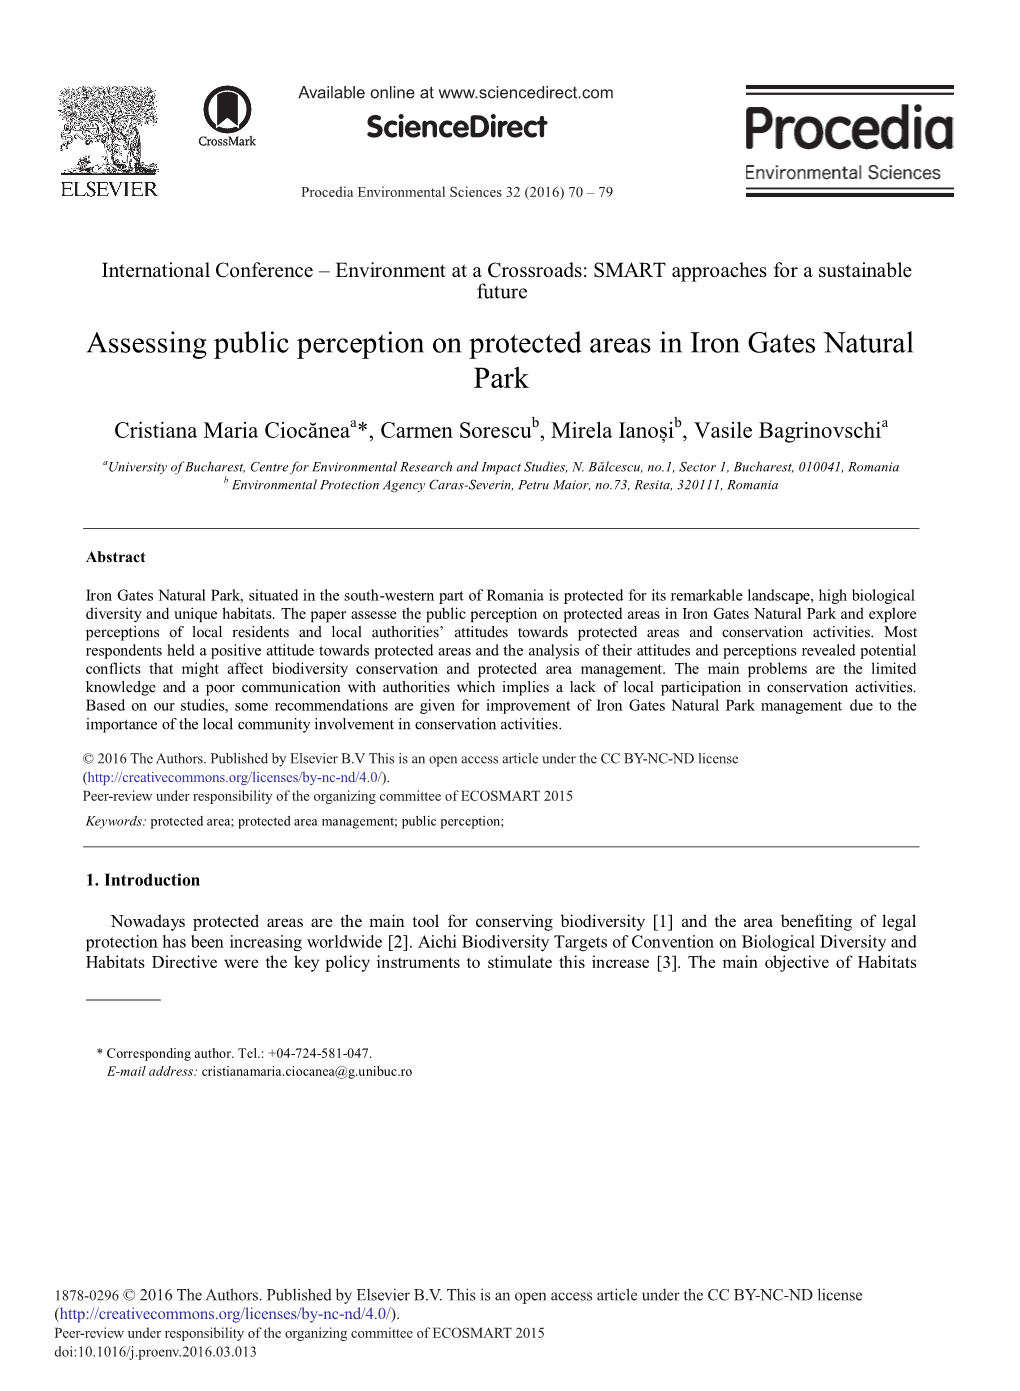 Assessing Public Perception on Protected Areas in Iron Gates Natural Park